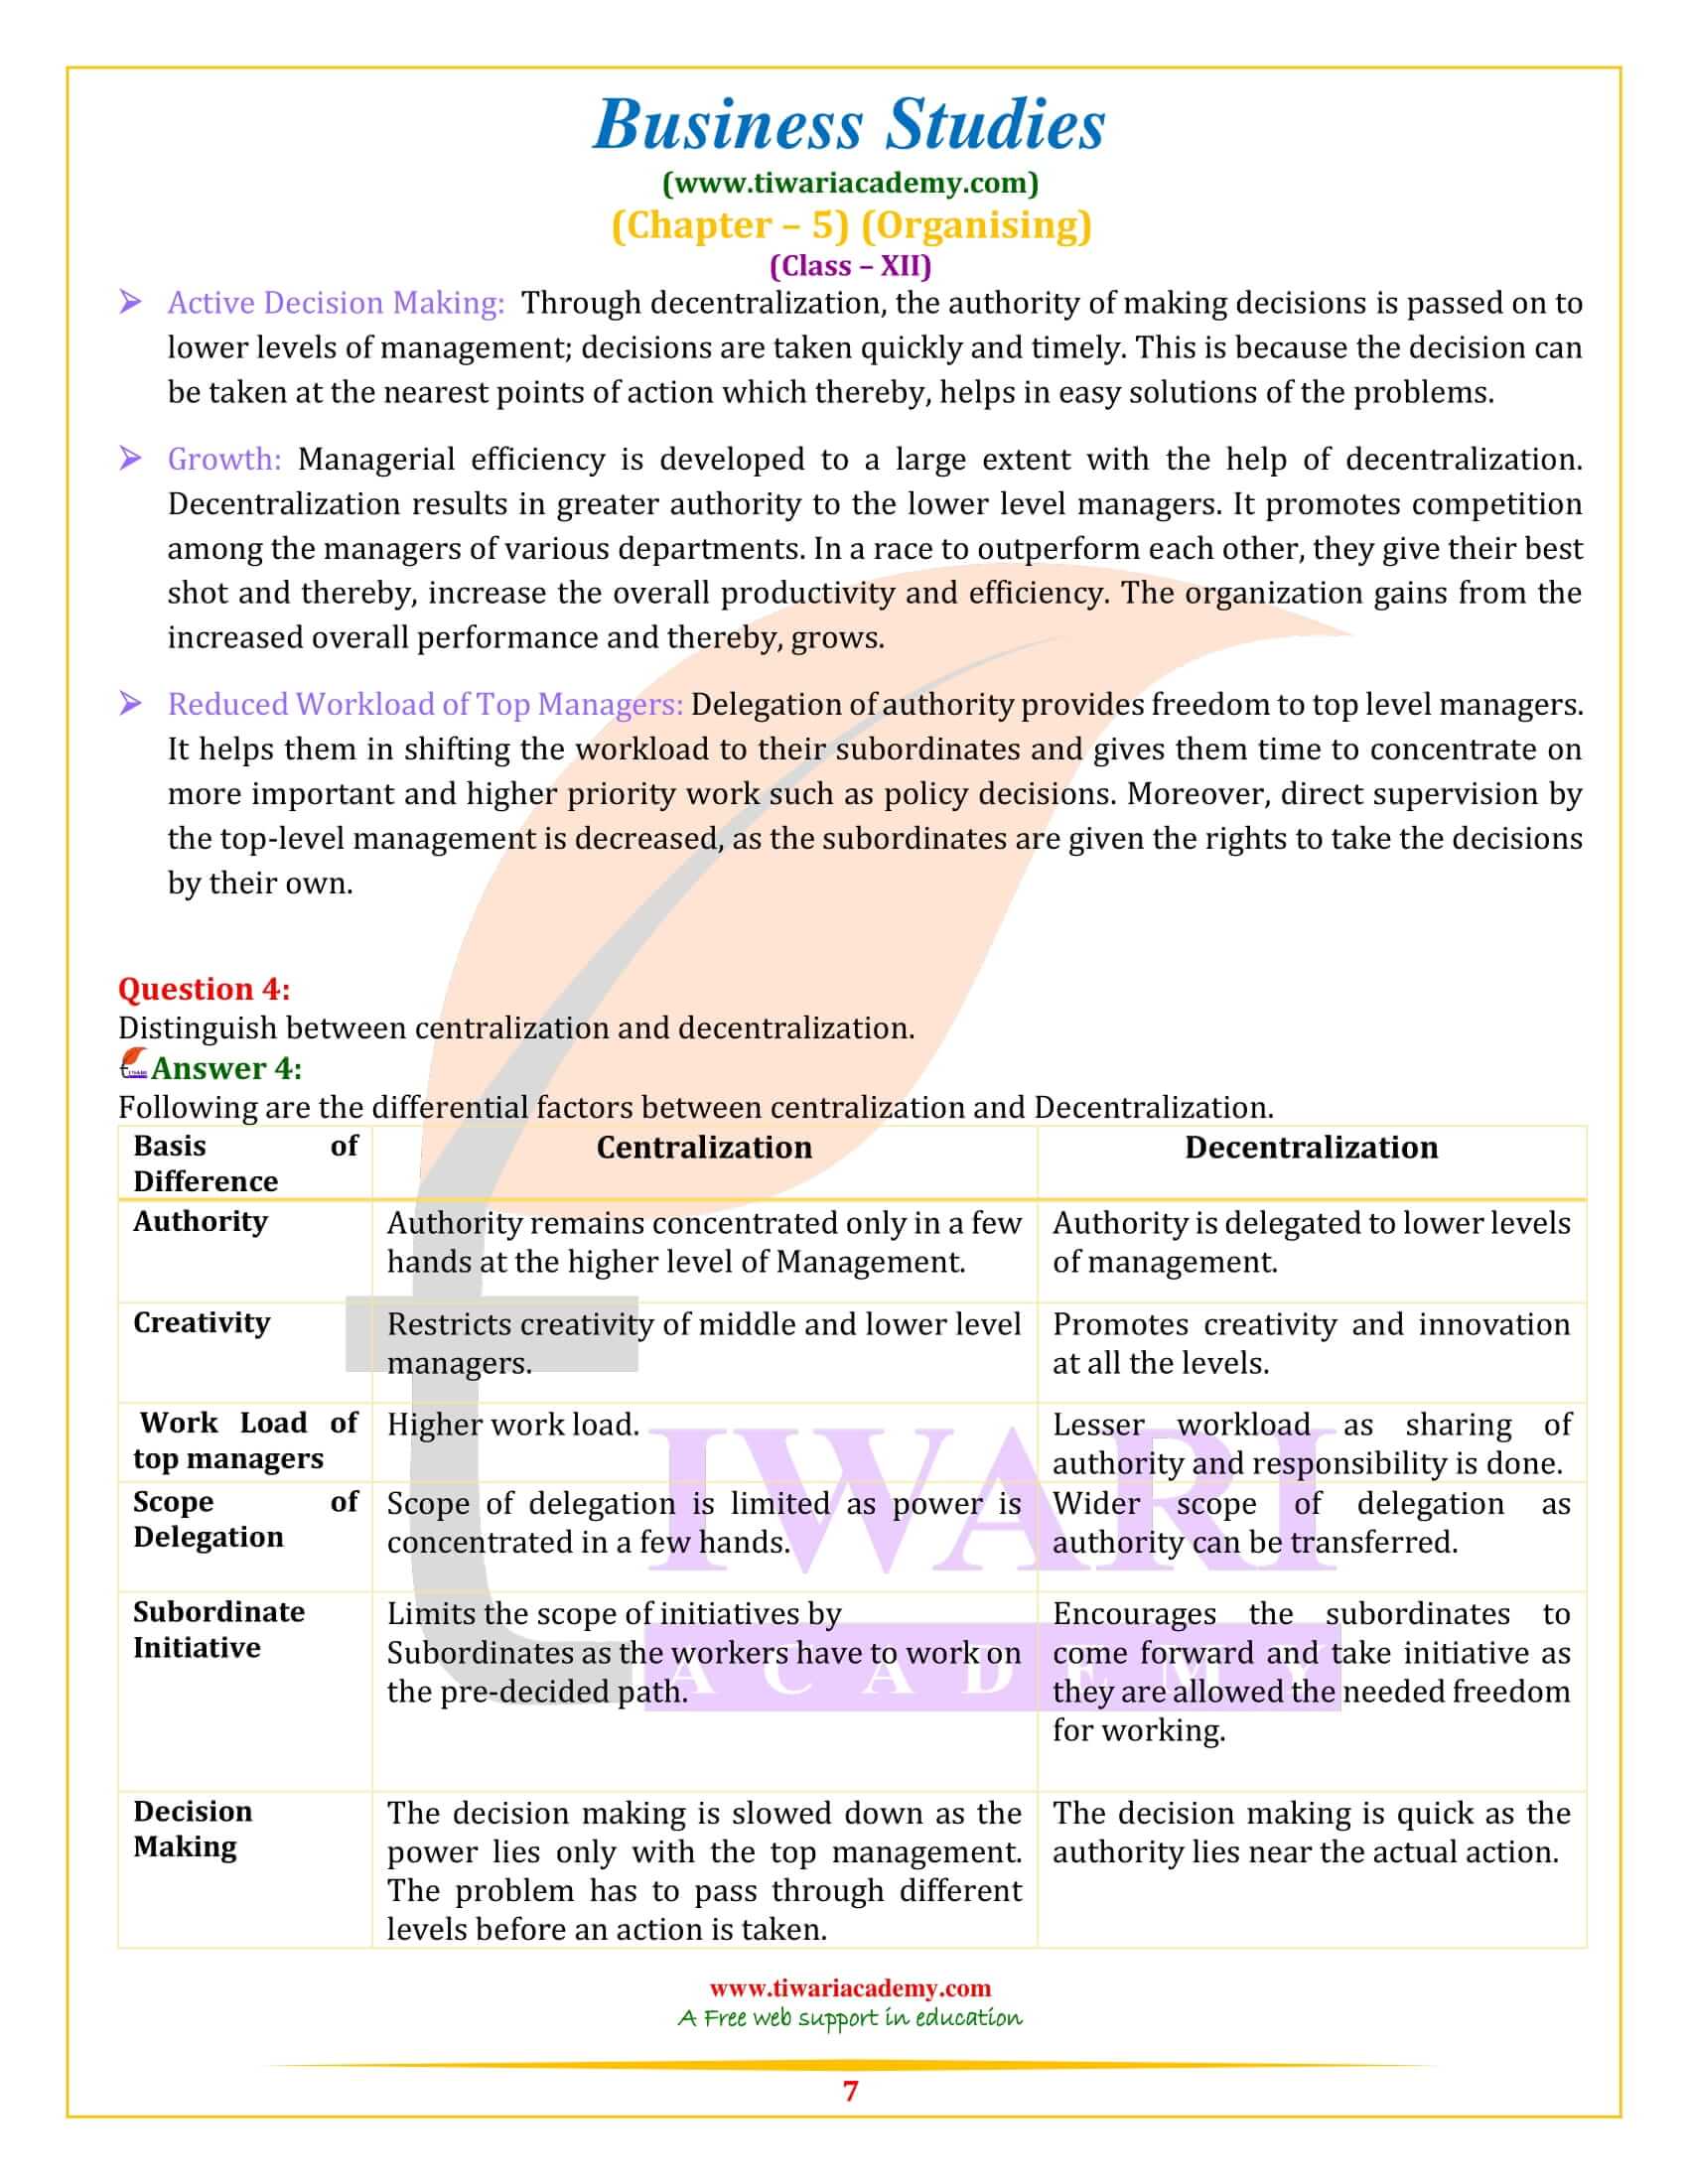 NCERT Solutions for Class 12 Business Studies Chapter 5 based on new syllabus